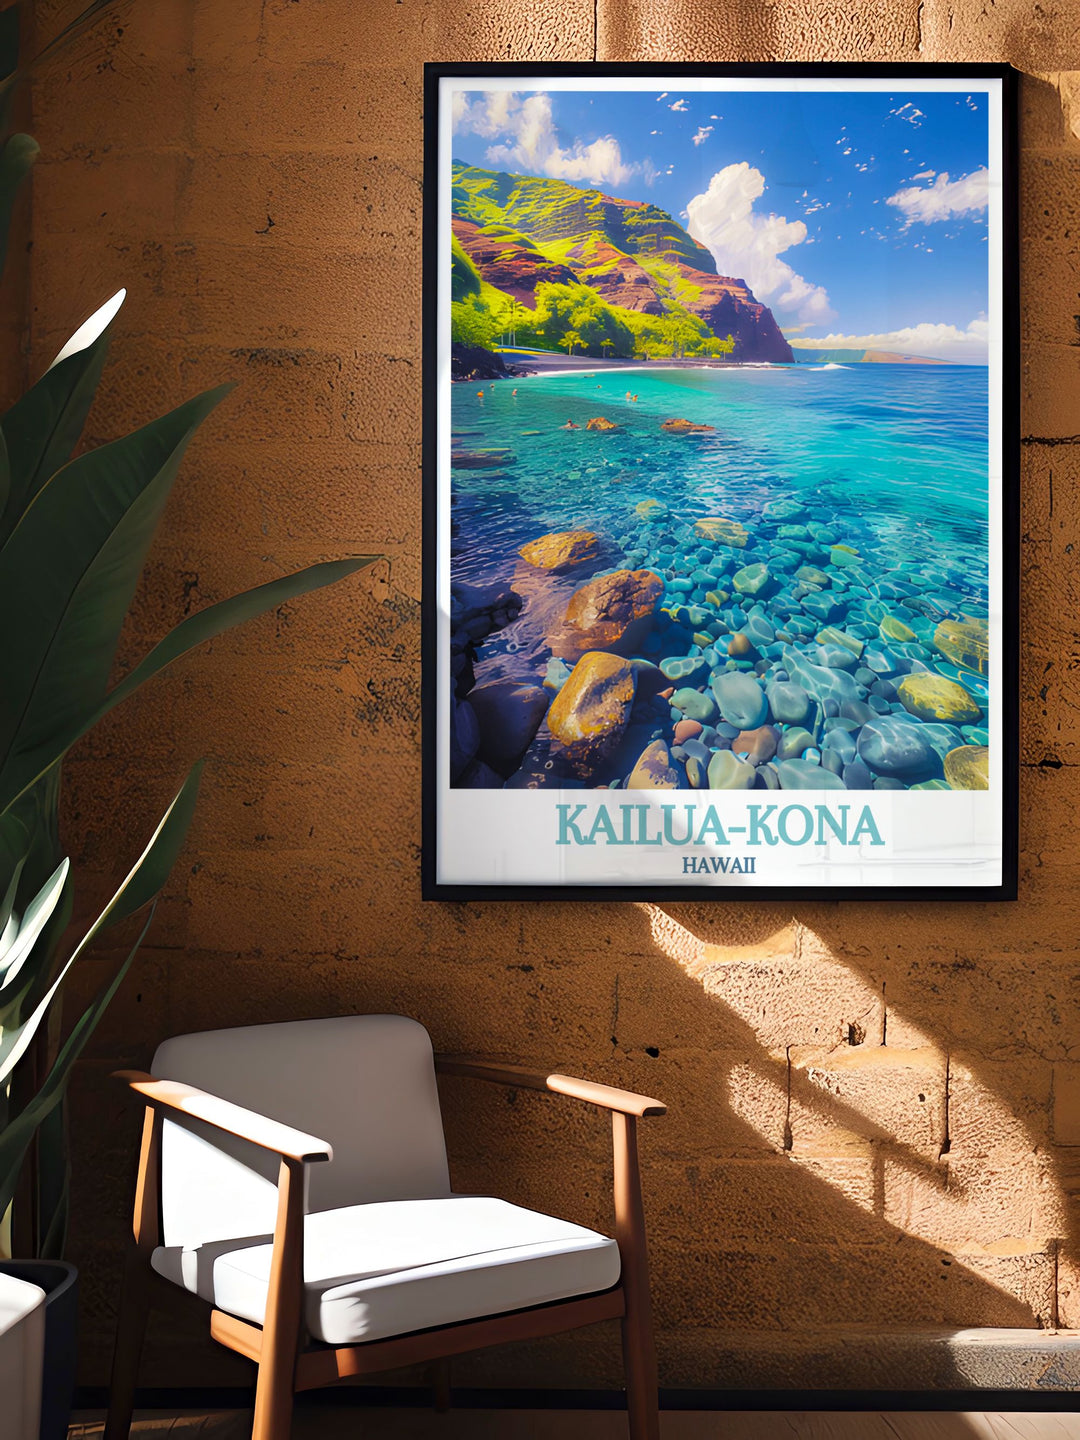 This colorful art print of Kailua Kona depicts its historical significance and natural beauty. The artwork features landmarks like Hulihee Palace and scenic beaches, perfect for any Hawaii themed decor.